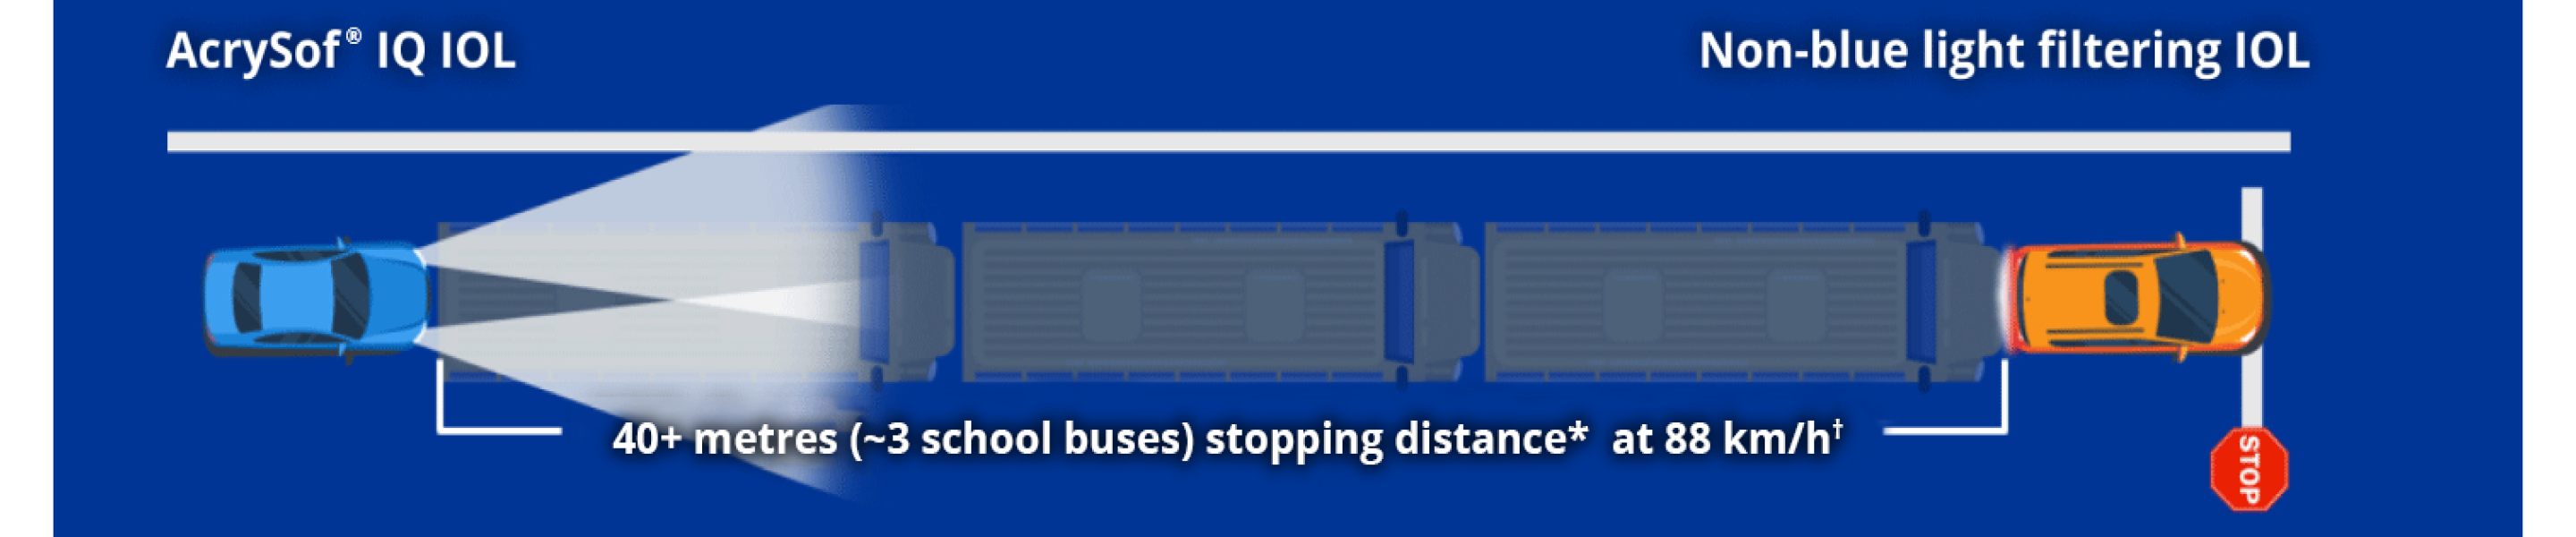 Illustration showing a car labelled as AcrySof IQ IOL and a car labelled as non-blue light filtering IOL. Text on screen reads, “40+ metres (~3 school buses) stopping distance at 88 km/h.”